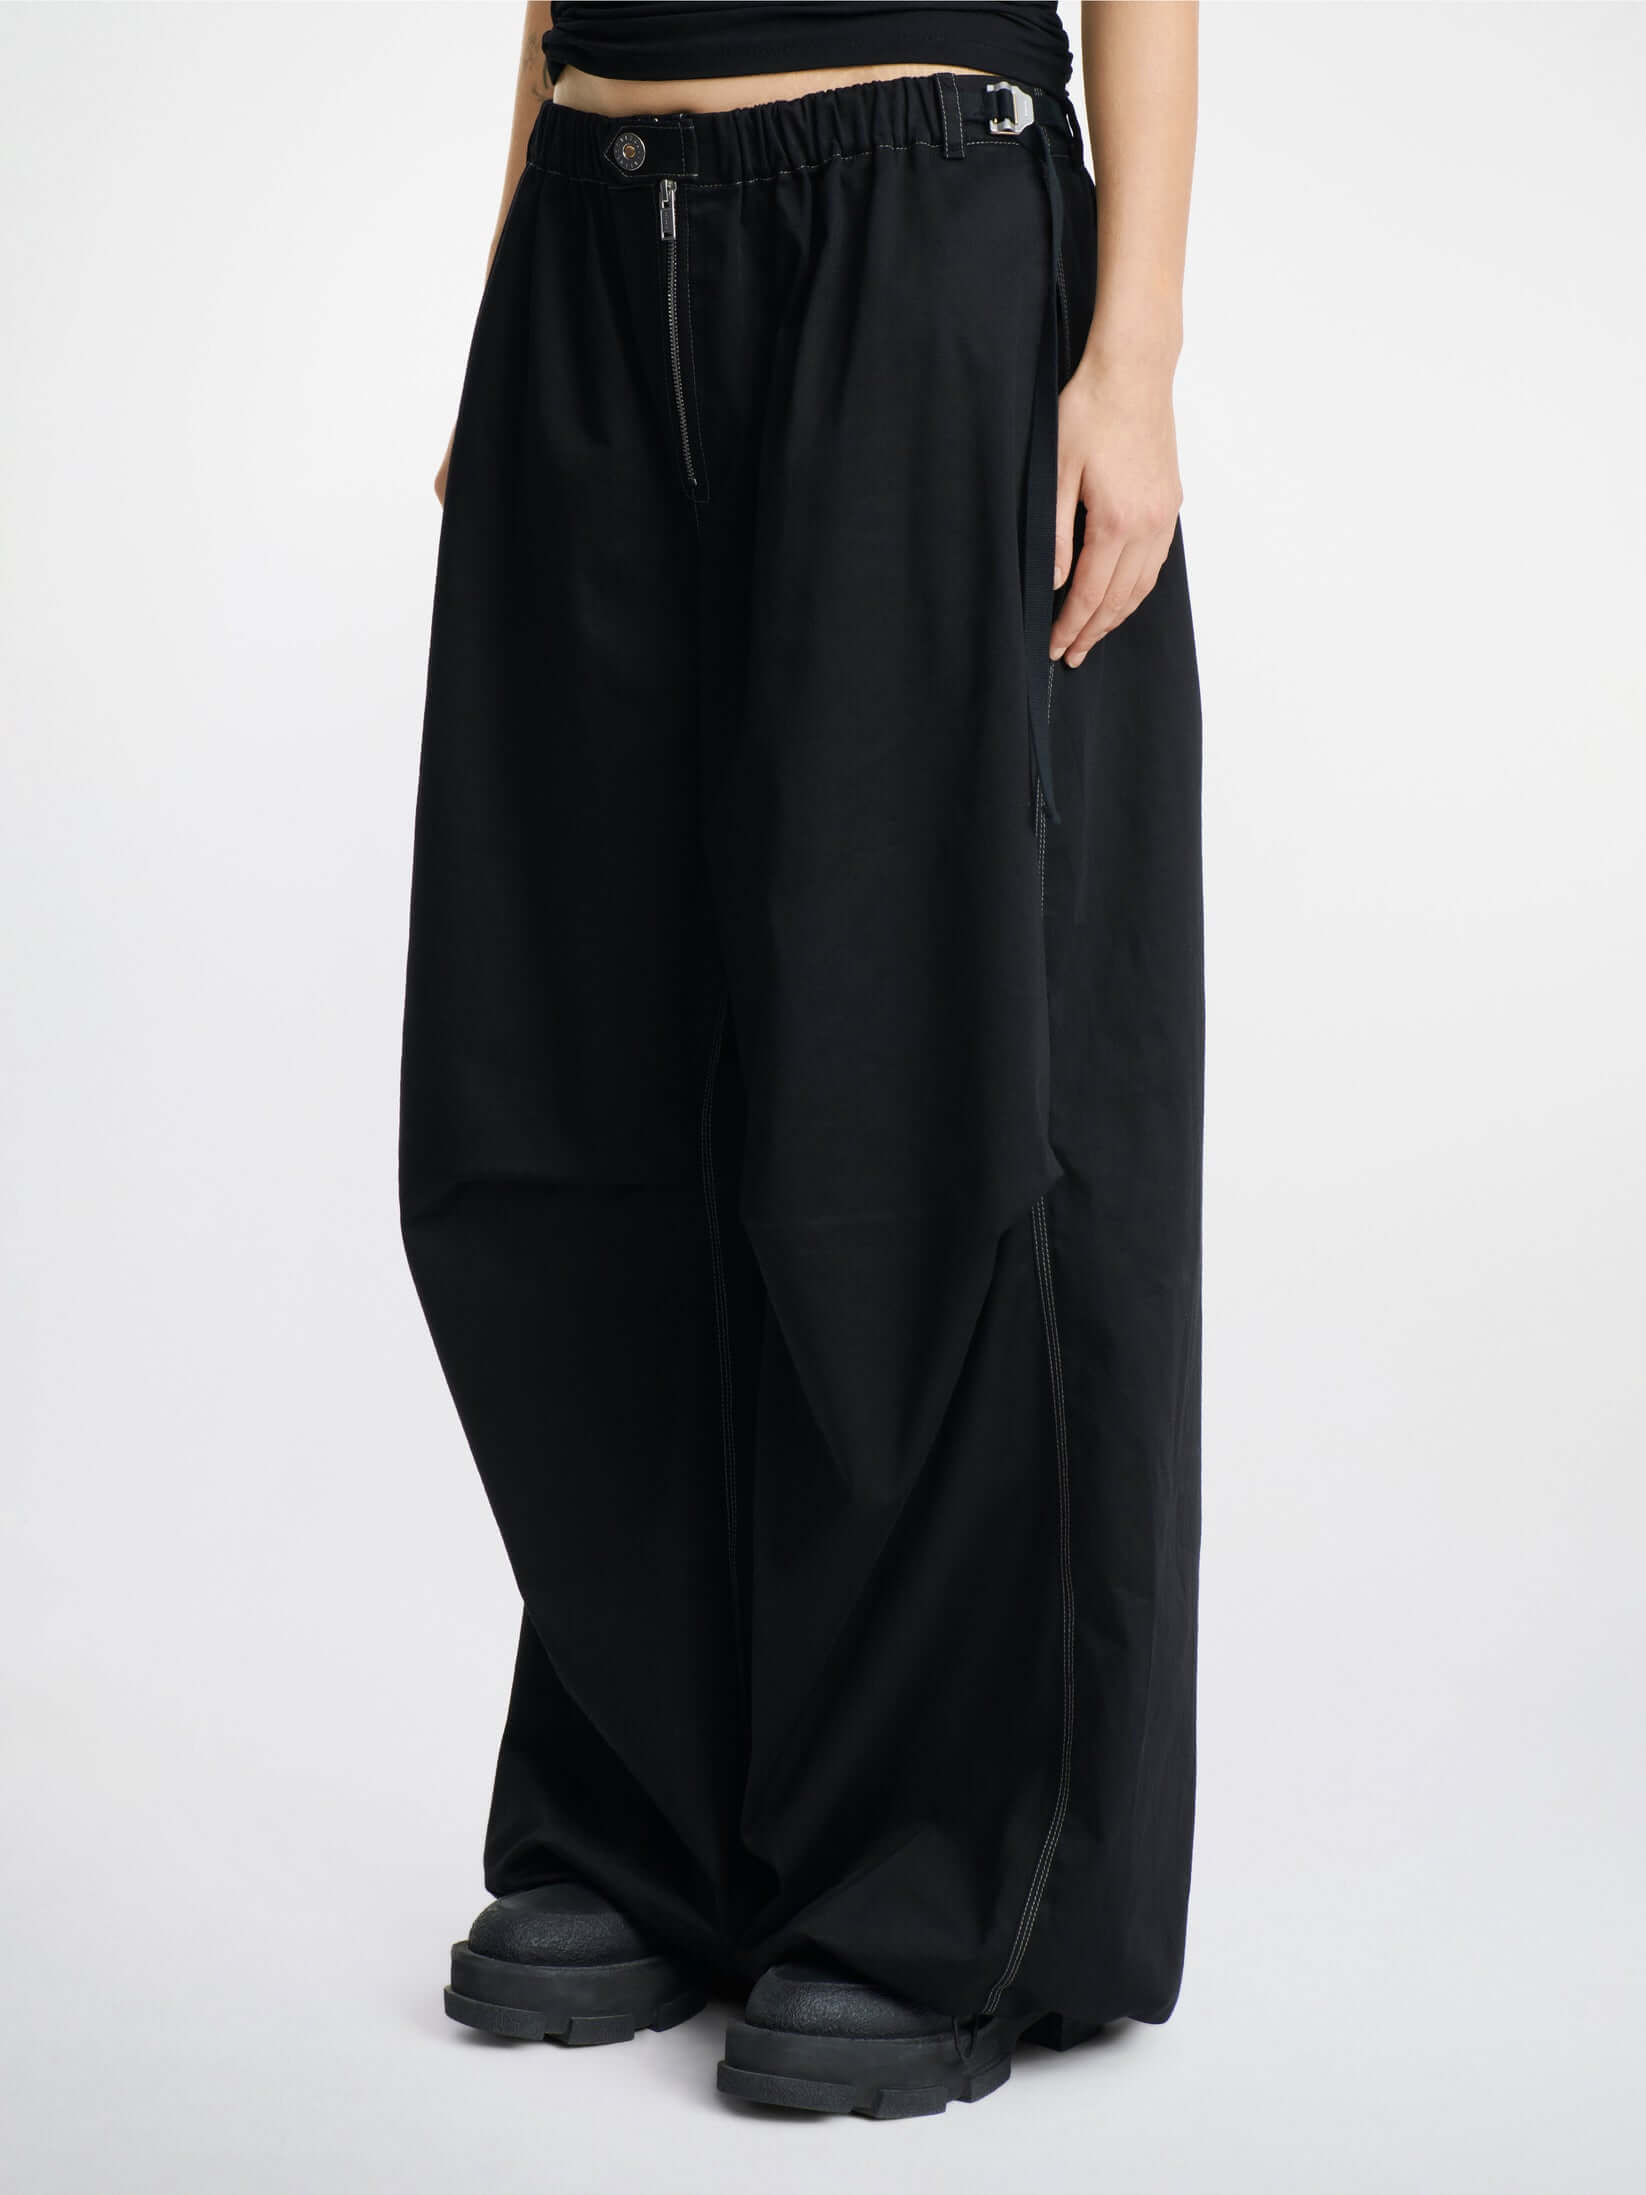 Dion Lee Oversized Flight Pant in Black available at The New Trend Australia.